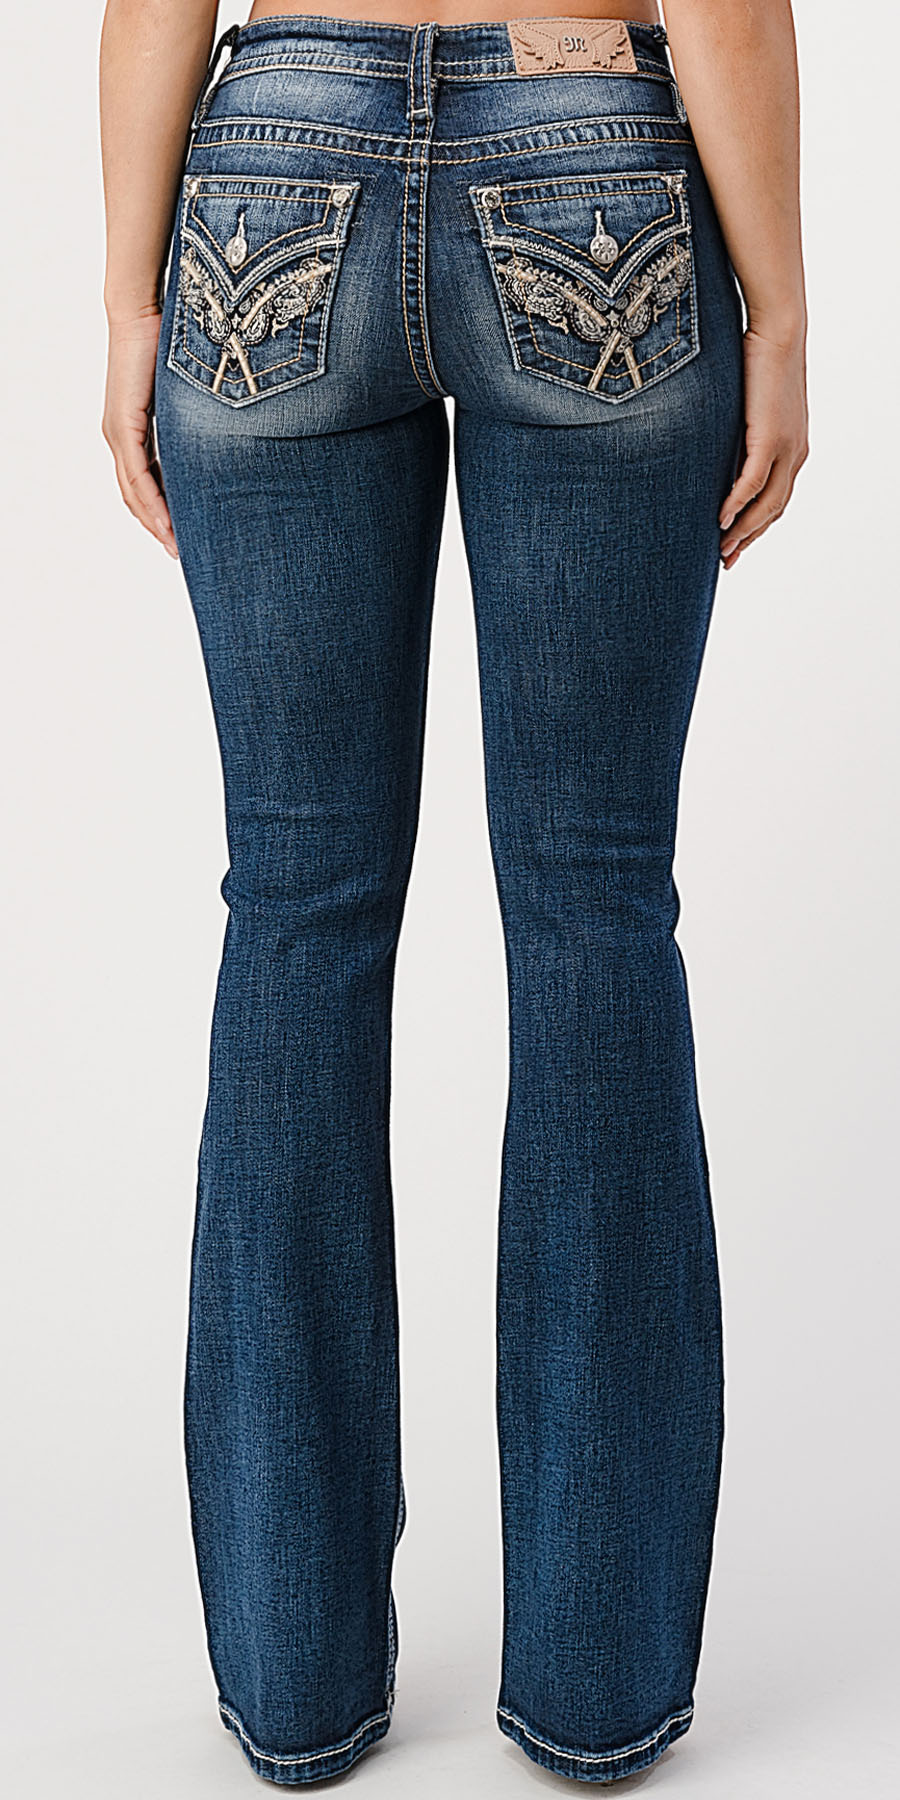 K1194 Twist It Up Bootcut Jeans X-Shaped Mid Rise Bootcut